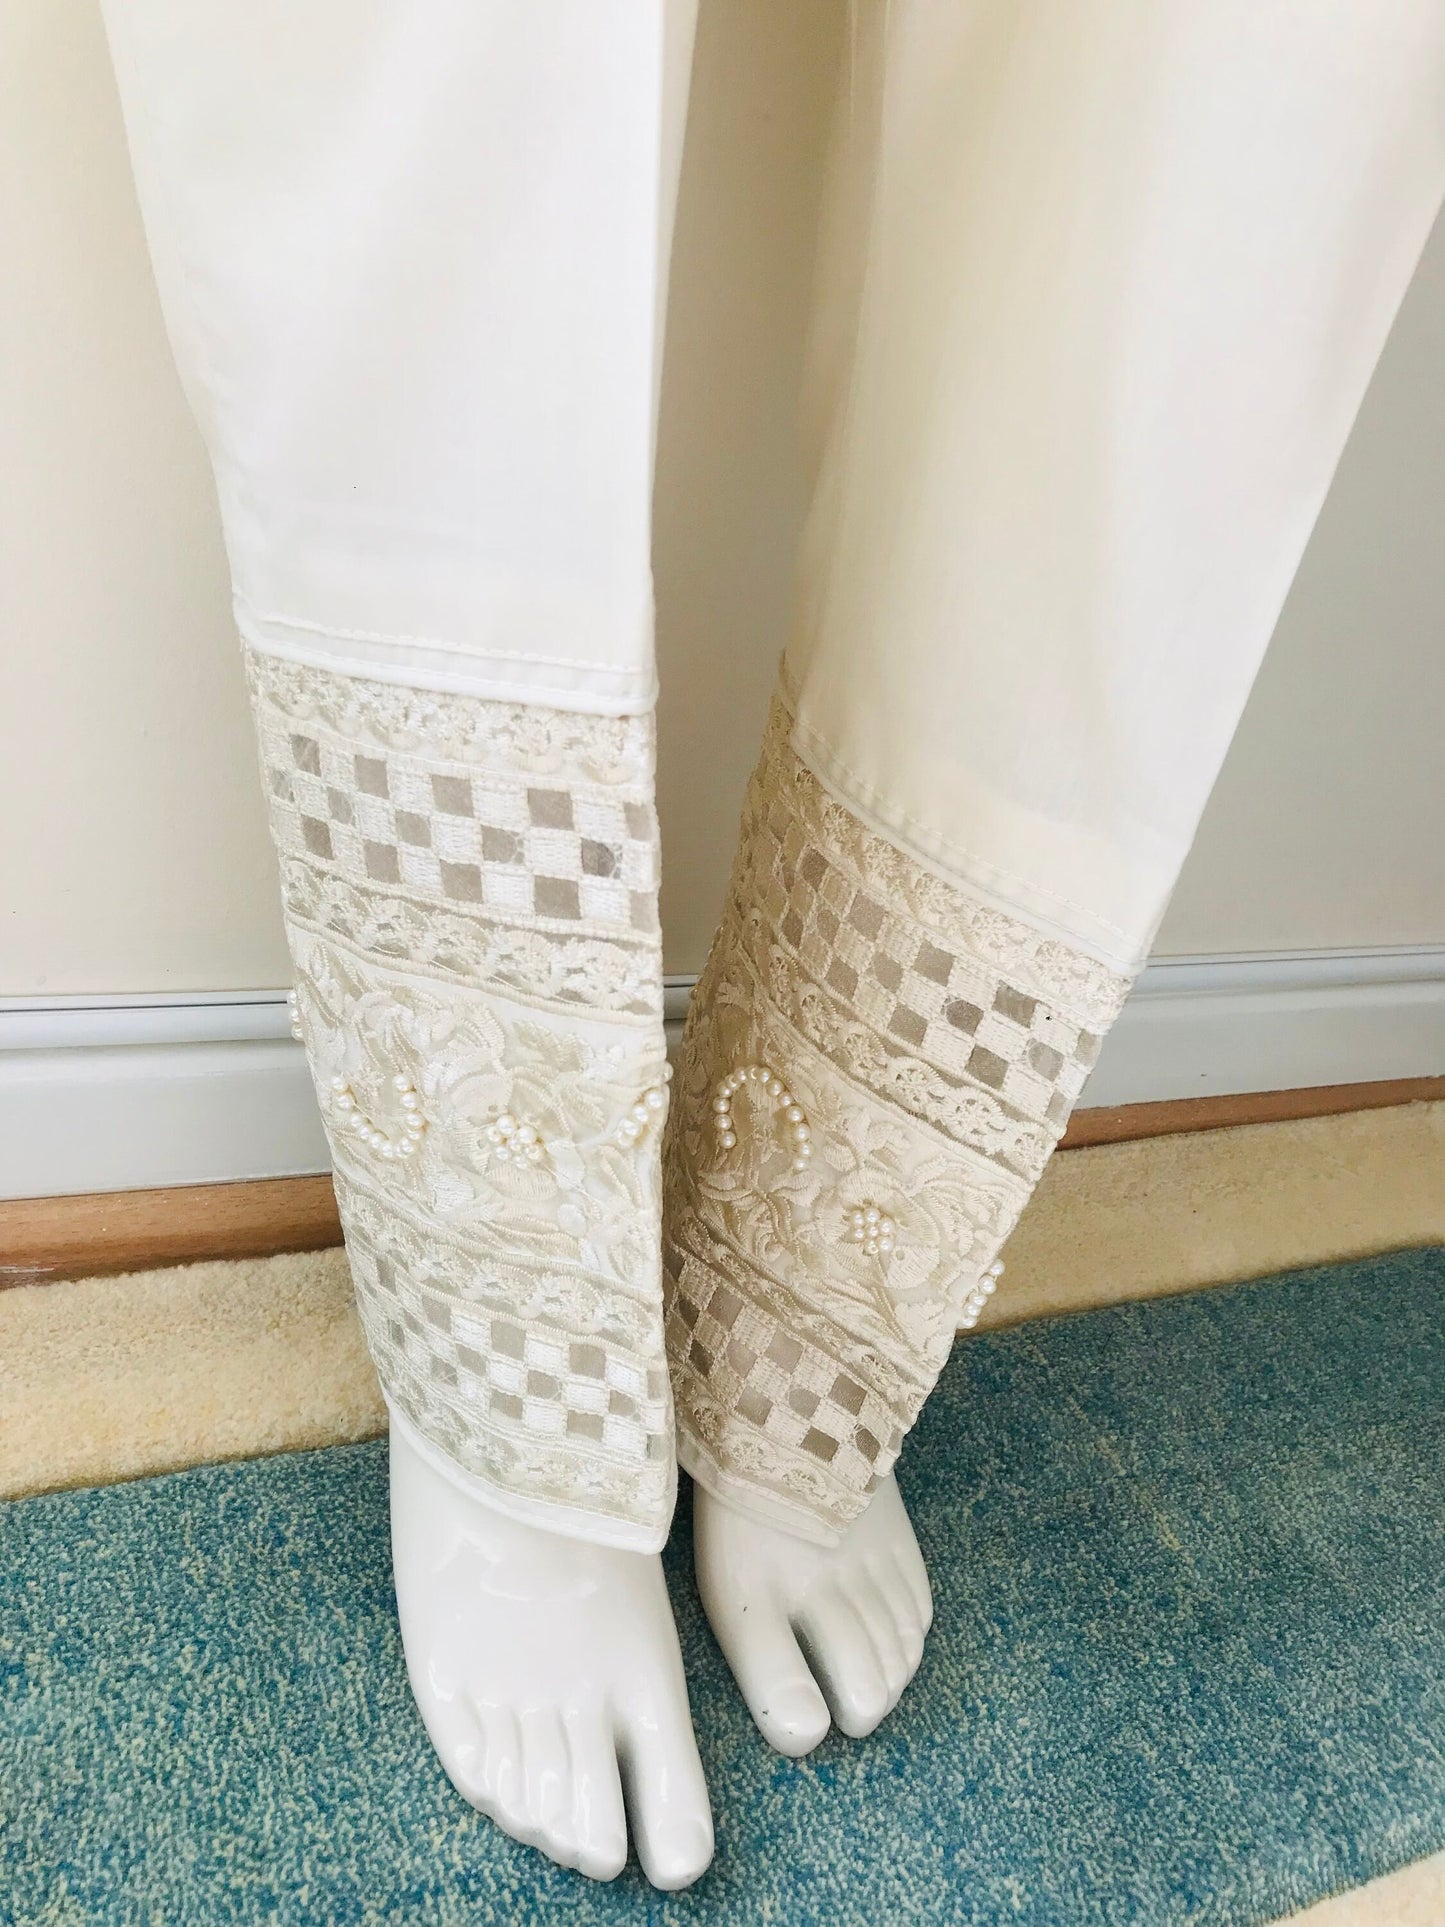 Embellished Indian Trouser Suit in Rani Pink Fabric LSTV114007